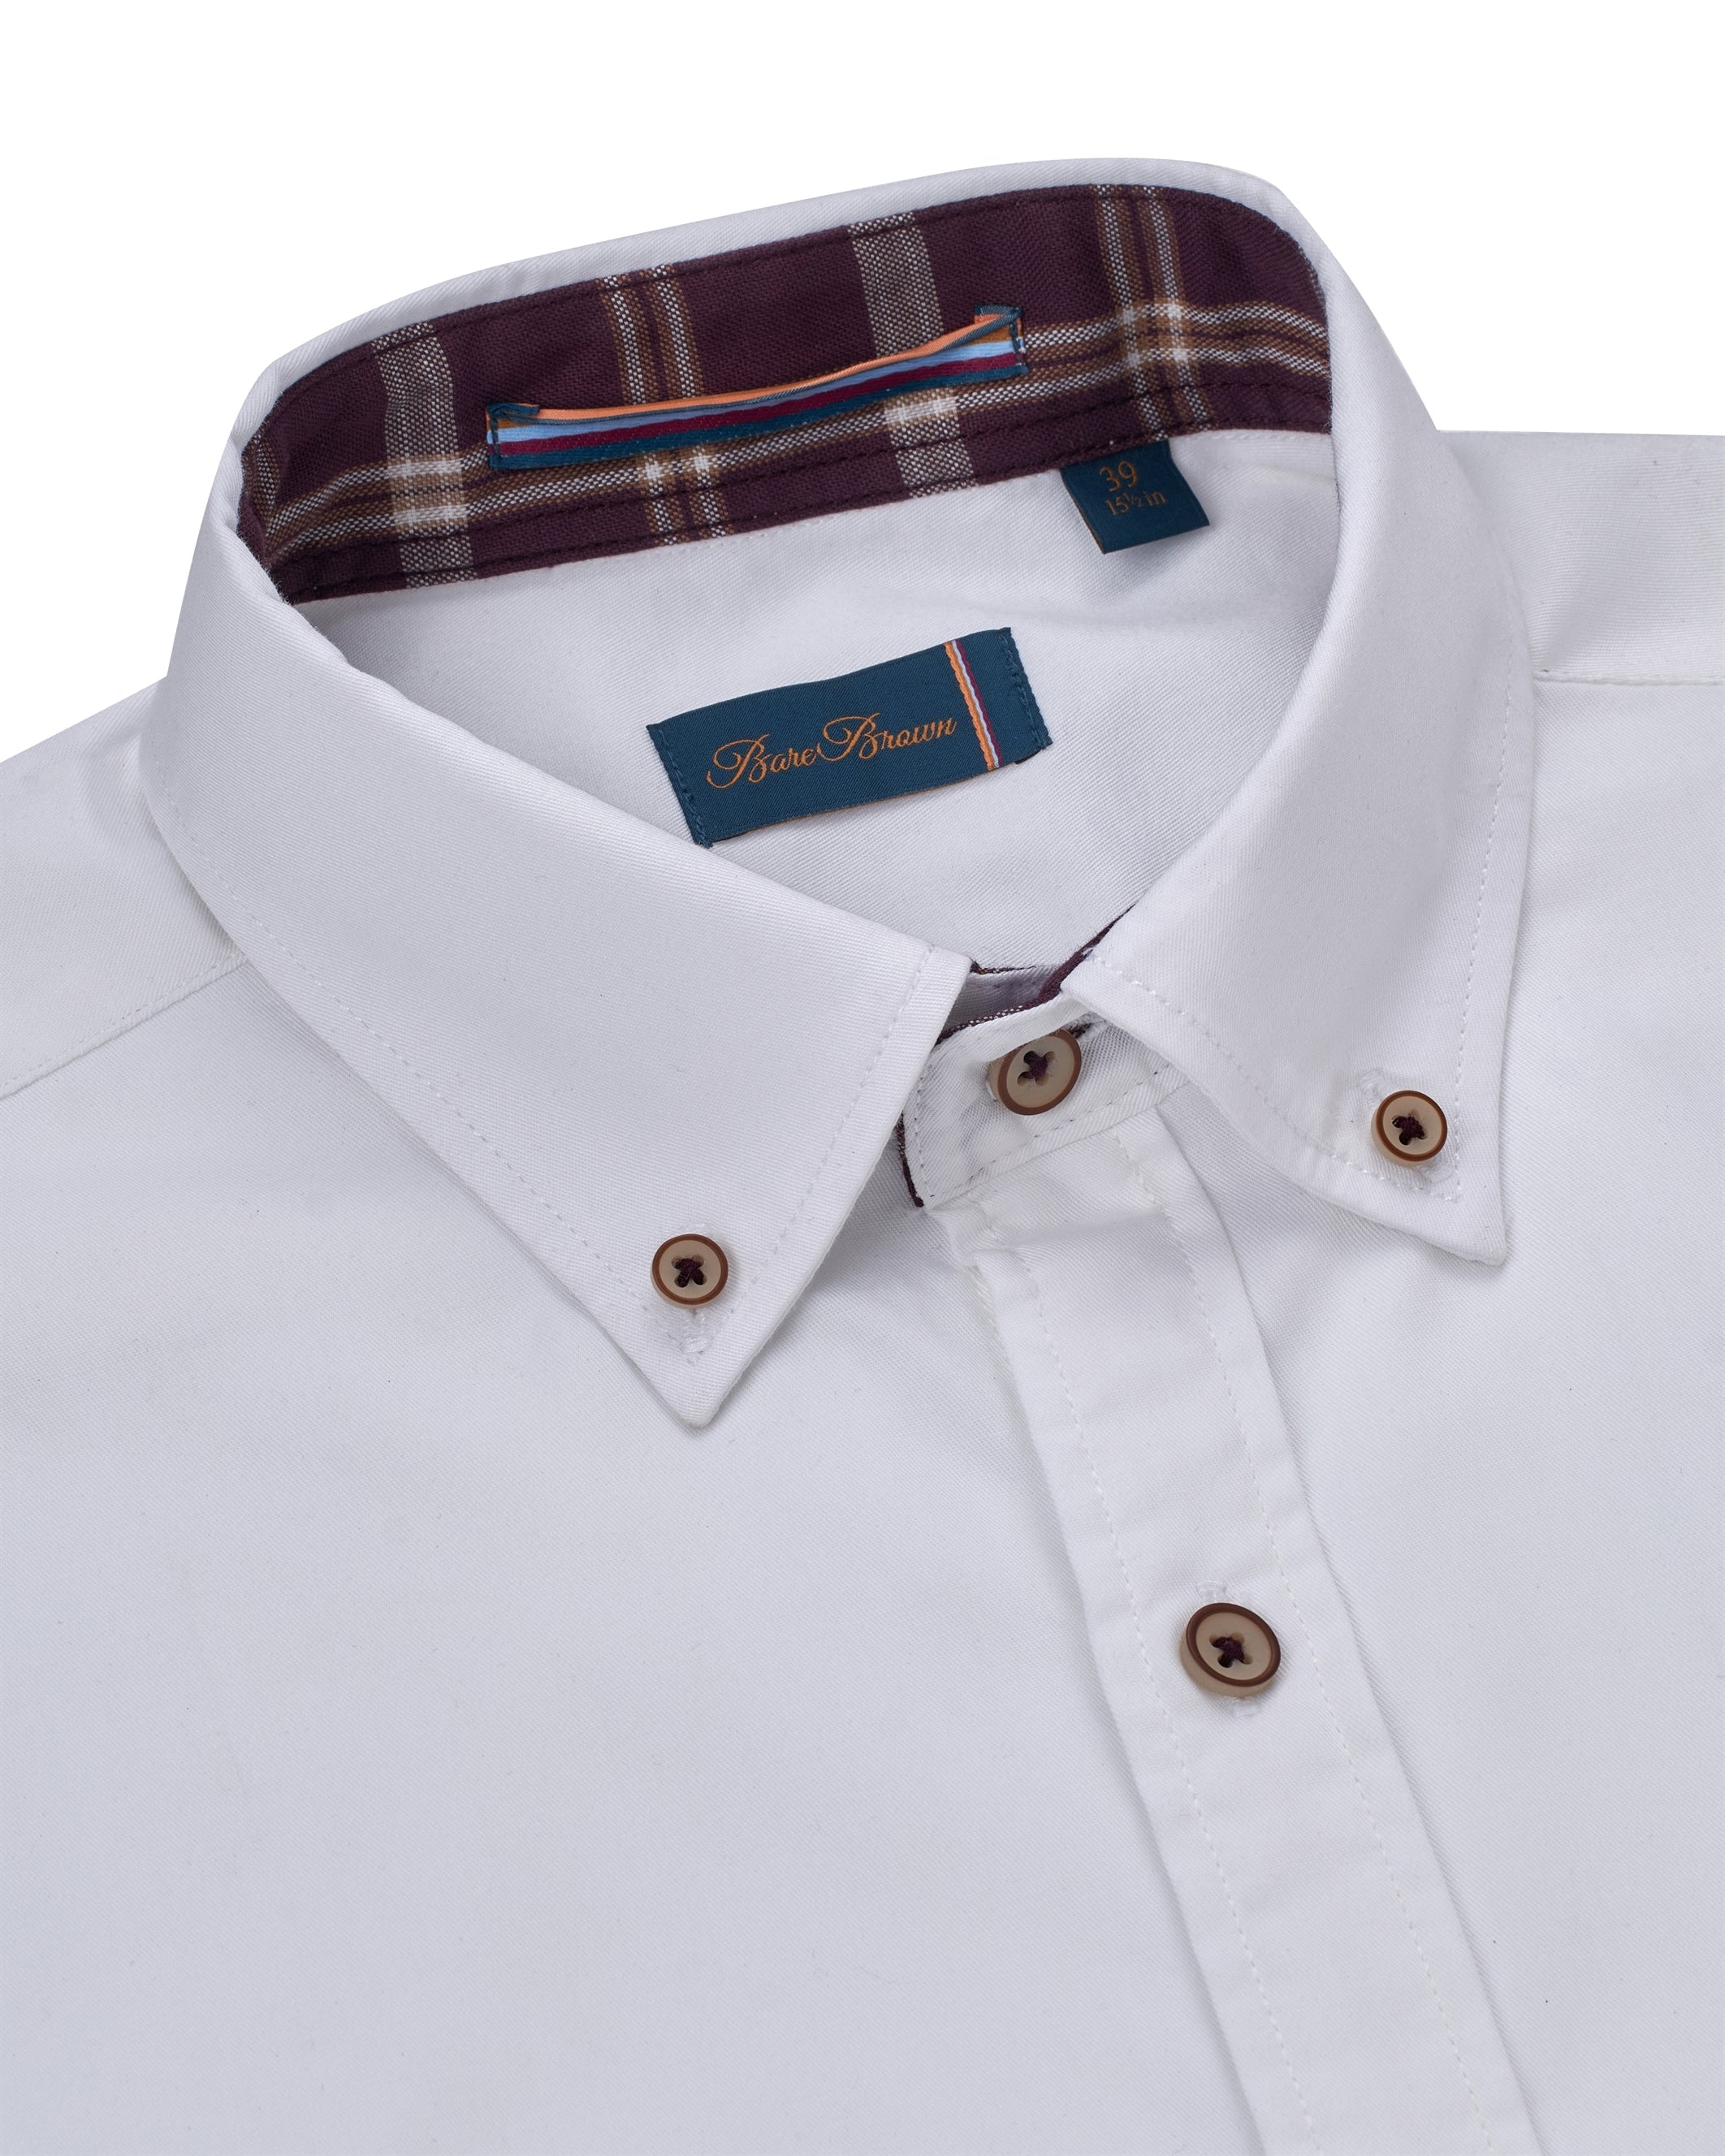 Bare Brown Cotton Stretch Shirt, Slim Fit with Full Sleeves - White